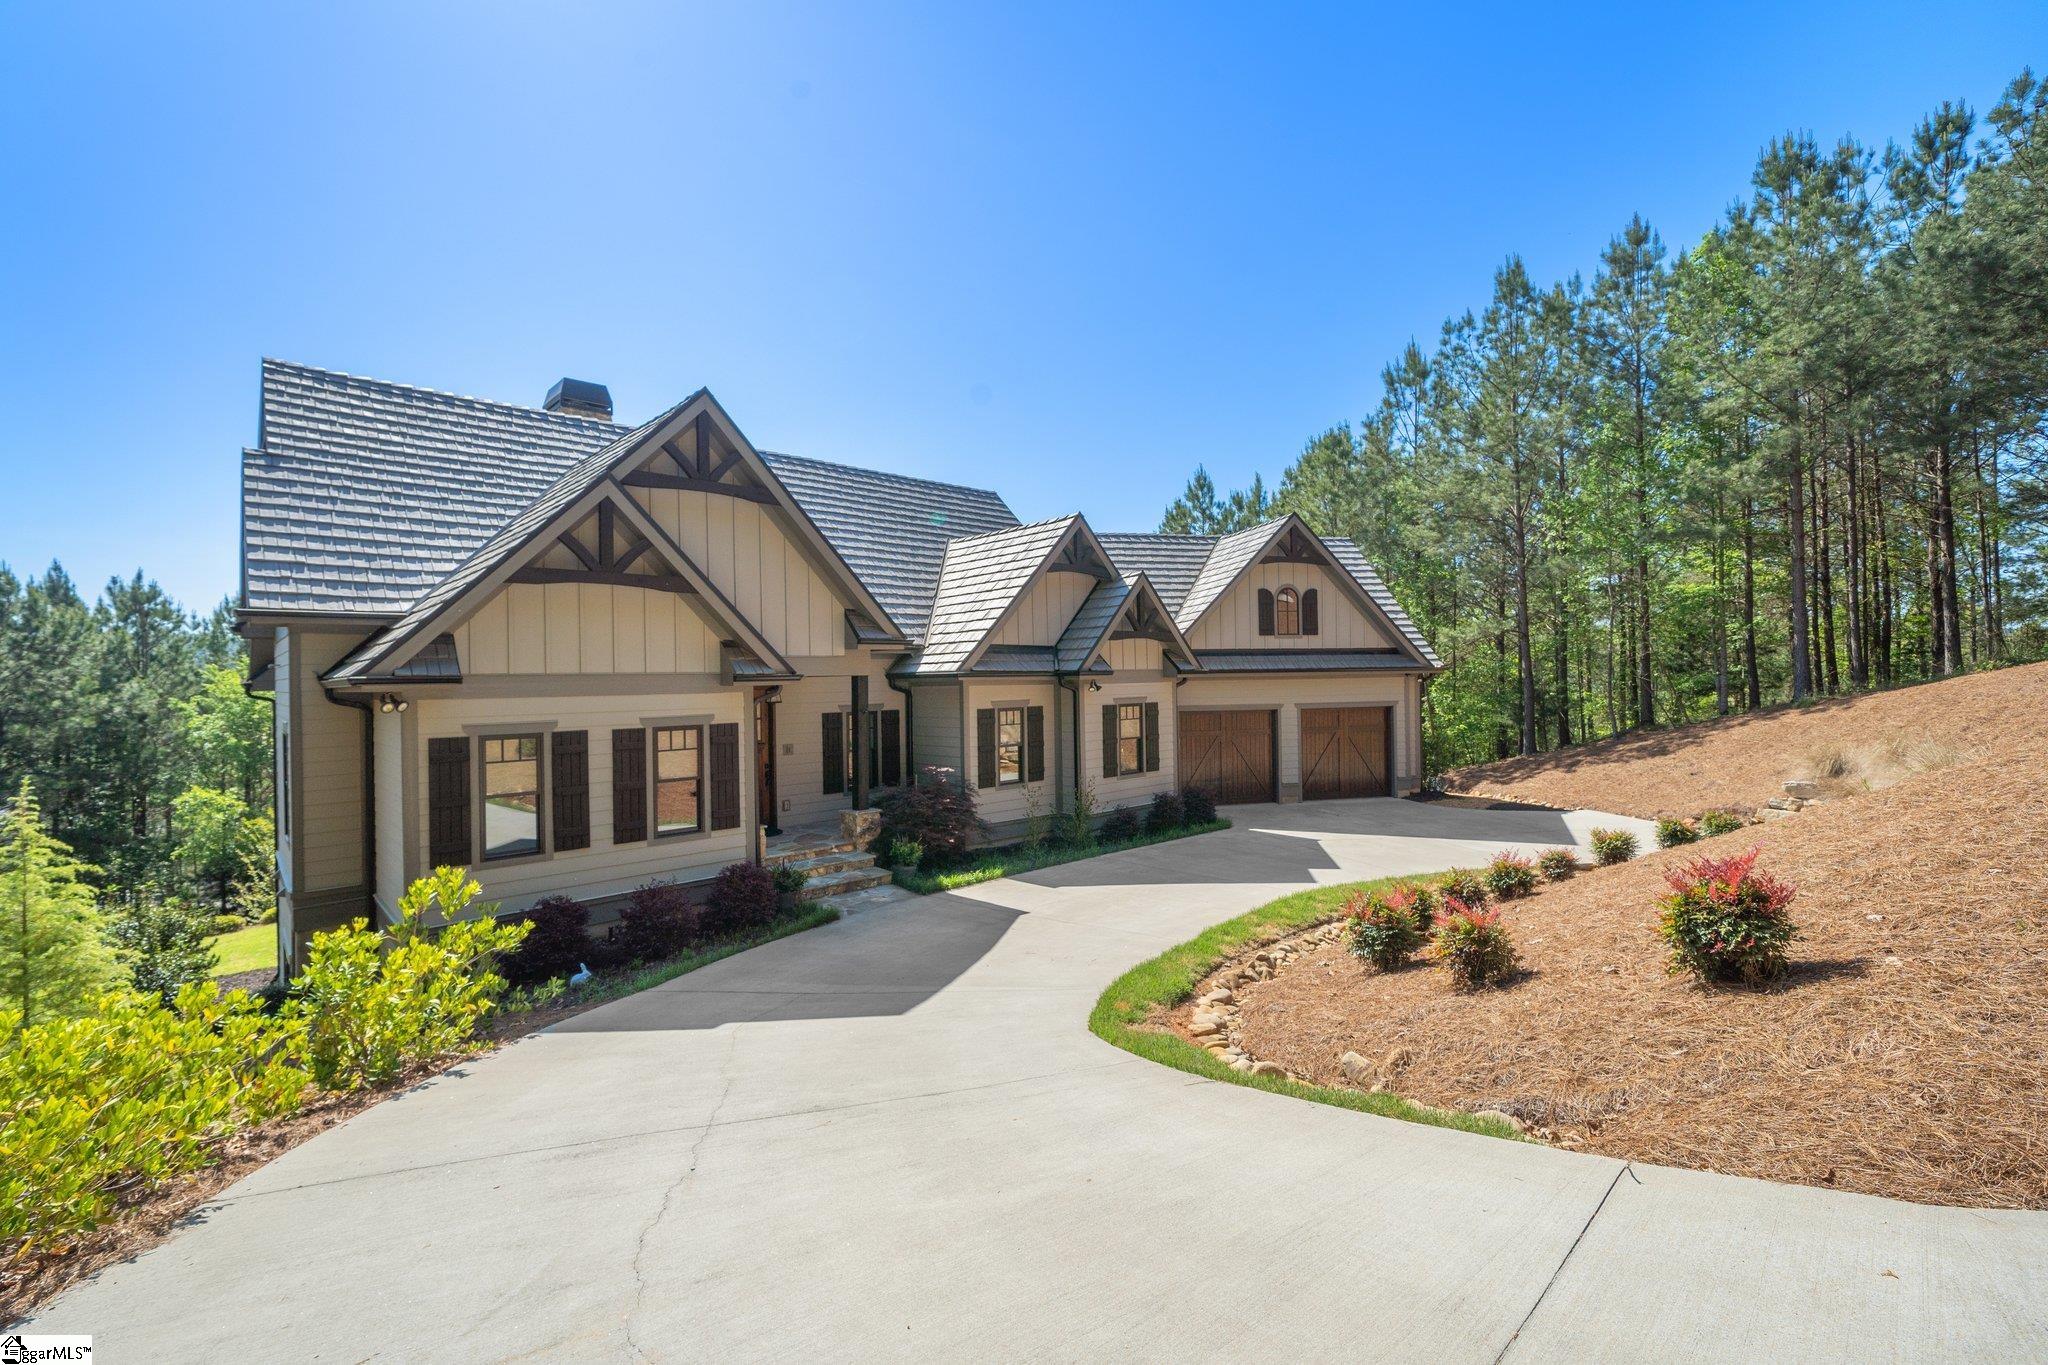 Impeccably maintained and professionally decorated and furnished, this 4 bedroom, 4 1/2 bath custom built home built just 3 years ago by Golden Corner is located near the Reserve Keowee gate with convenient access to Clemson, Pickens and Seneca. The entire first floor is flooded with natural light that shines throughout which makes this home so inviting the minute you walk through the front door. You’ll immediately notice the wall of windows in the great room with the cathedral ceiling, providing direct access to a covered porch for entertaining overflow. Gourmet eat-in kitchen with white cabinetry, granite counters, extra-large kitchen island, Jenn Air appliances, beverage/coffee bar with beverage fridge, built-in Elkay bottle filler and extra-large walk in pantry. The screened porch off the dining area of the kitchen provides another porch to enjoy your morning cup of coffee, afternoon beverage or dinner. The granite island provides additional seating to the dining table that easily seats 8. Hardwood flooring and tile flooring throughout the entire house. Custom window treatments create the perfect finishing touch. The well-appointed master suite has an oversized curbless shower for easy access, double sinks and extra-large walk-in closet. Motorized roller shades in kitchen and screened porch. The terrace walk-out level includes a wet bar with beverage cooler, large family/rec room, guest bedroom ensuite and two additional bedrooms with direct access to two additional full baths. There is an additional bonus room that can be used as a 5th bedroom, media room or office. Access the covered patio through the glass doors off the rec room and walk the stone steps down to the fire pit with seating in the back yard. Seasonal water views. Premier membership deposit of $72,000 is required to be paid at closing. Appointment required.